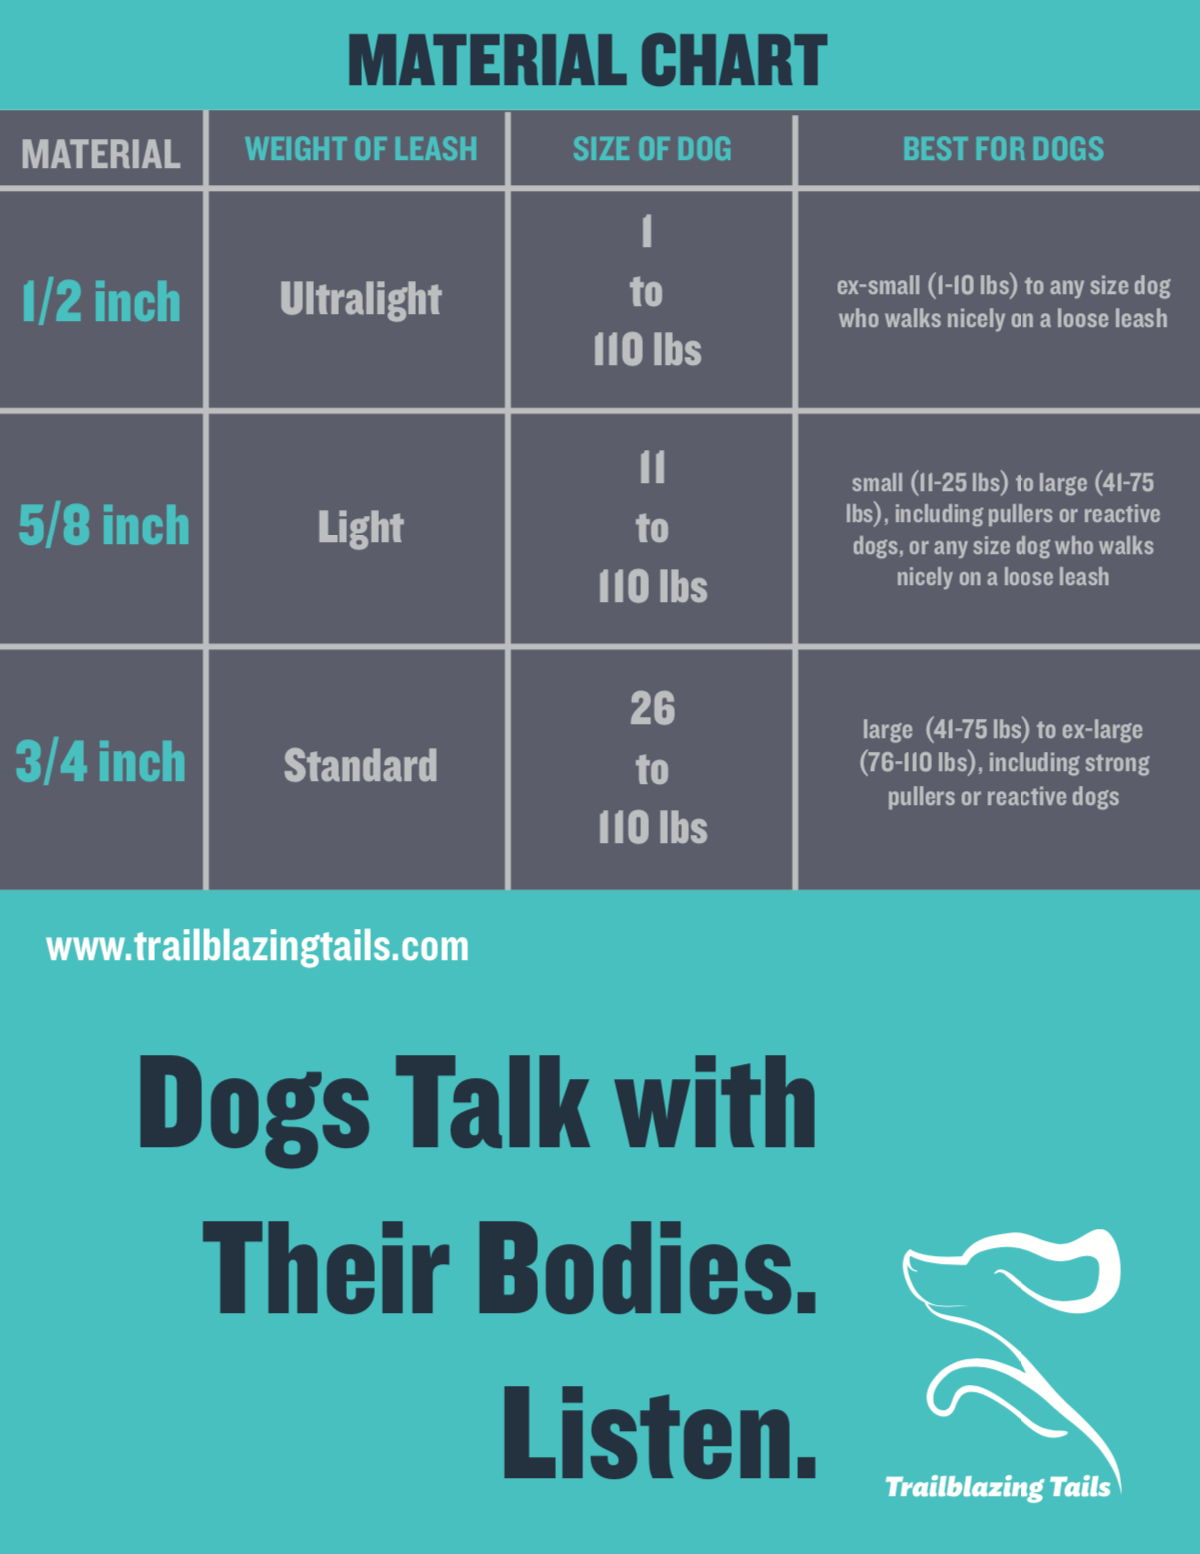 Dogs communicate with their bodies through the Trailblazing Tails: The Pica (current stock) hands-free dog leash by Your Whole Dog. Listen to their cues with this helpful infographic.